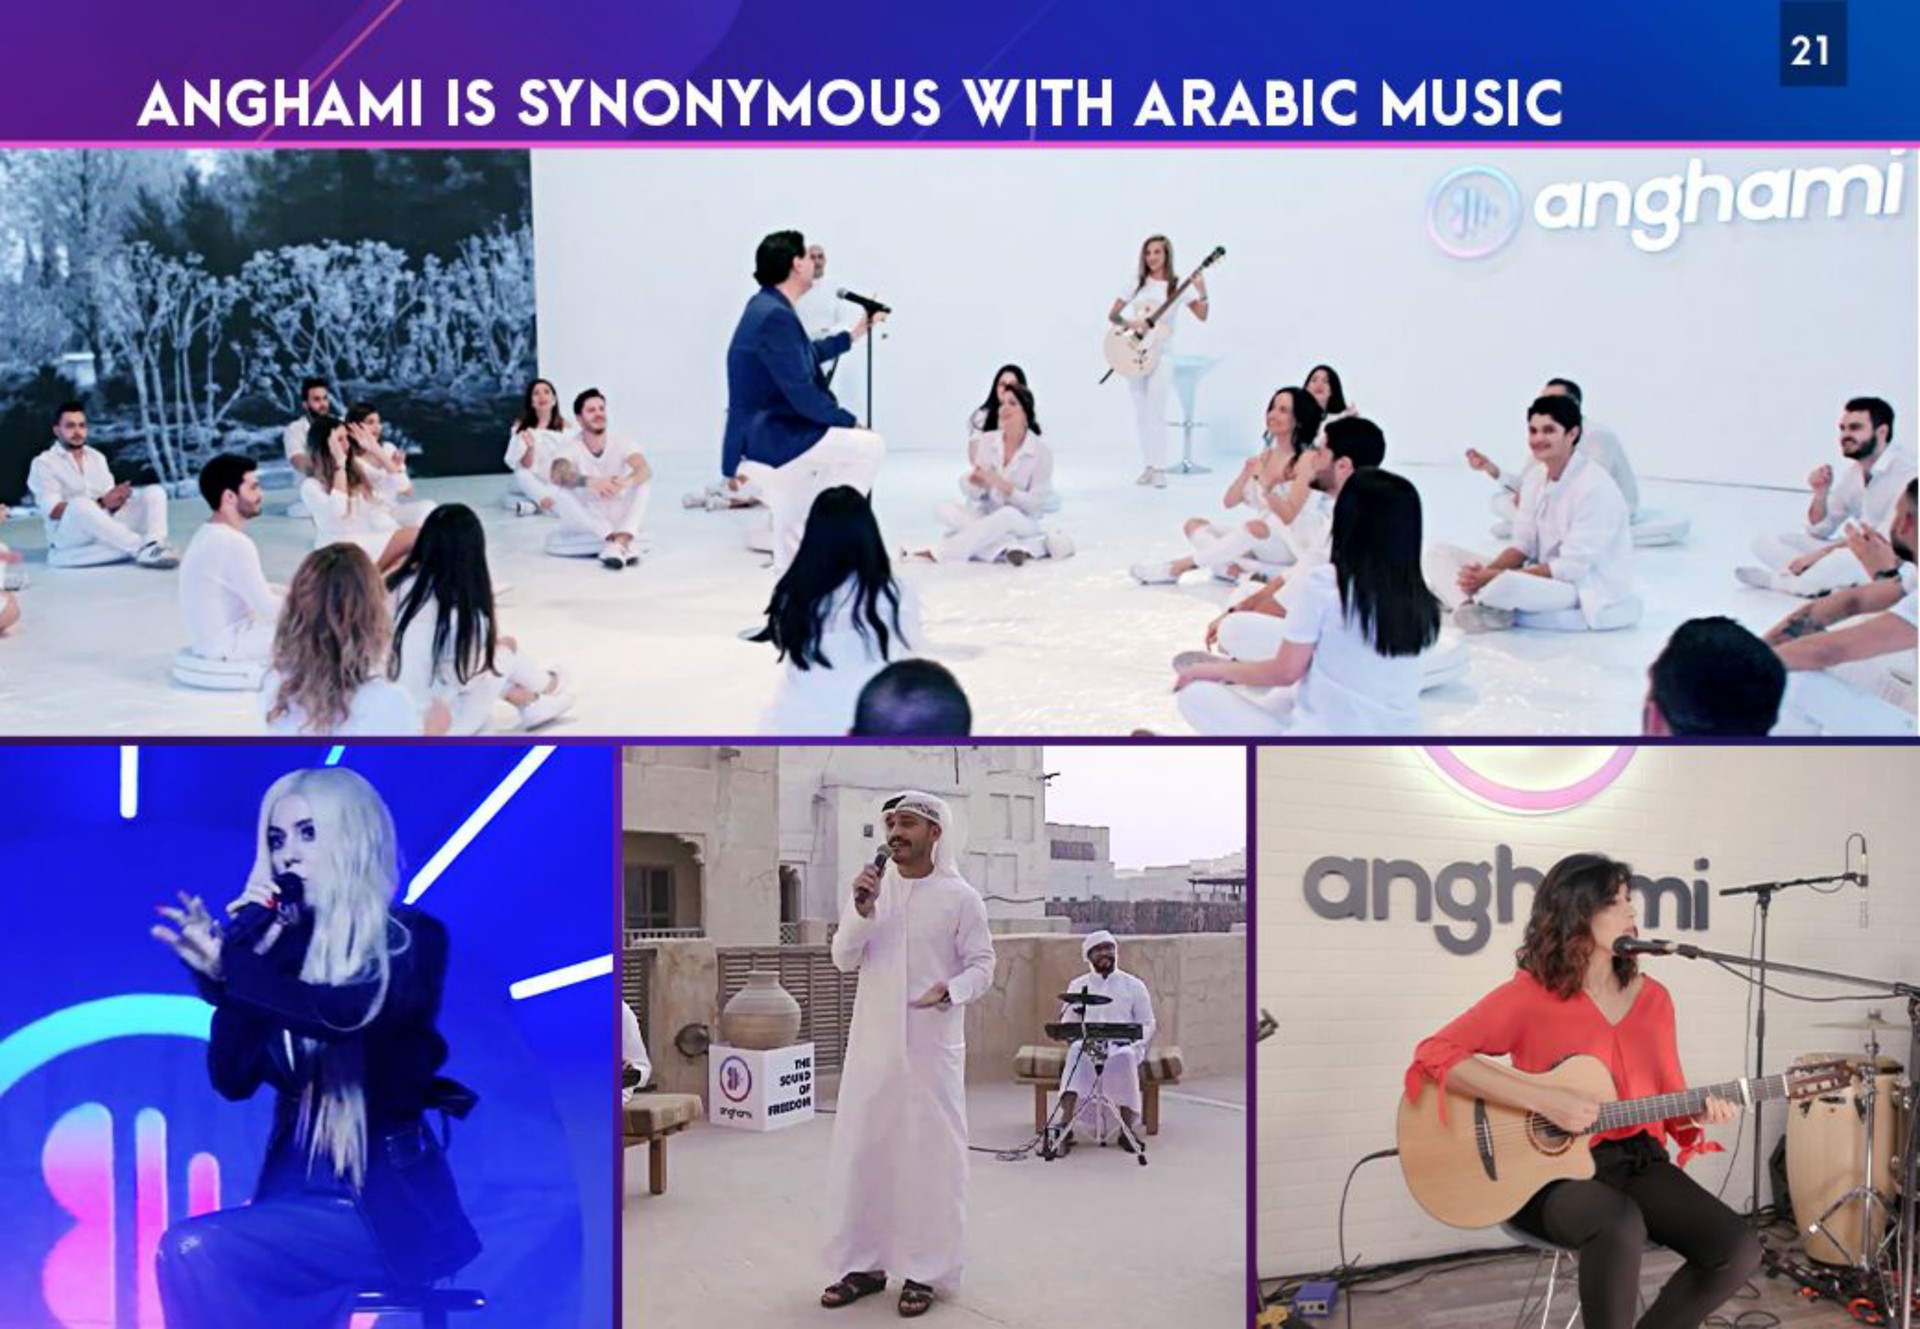 is synonymous with music | Anghami